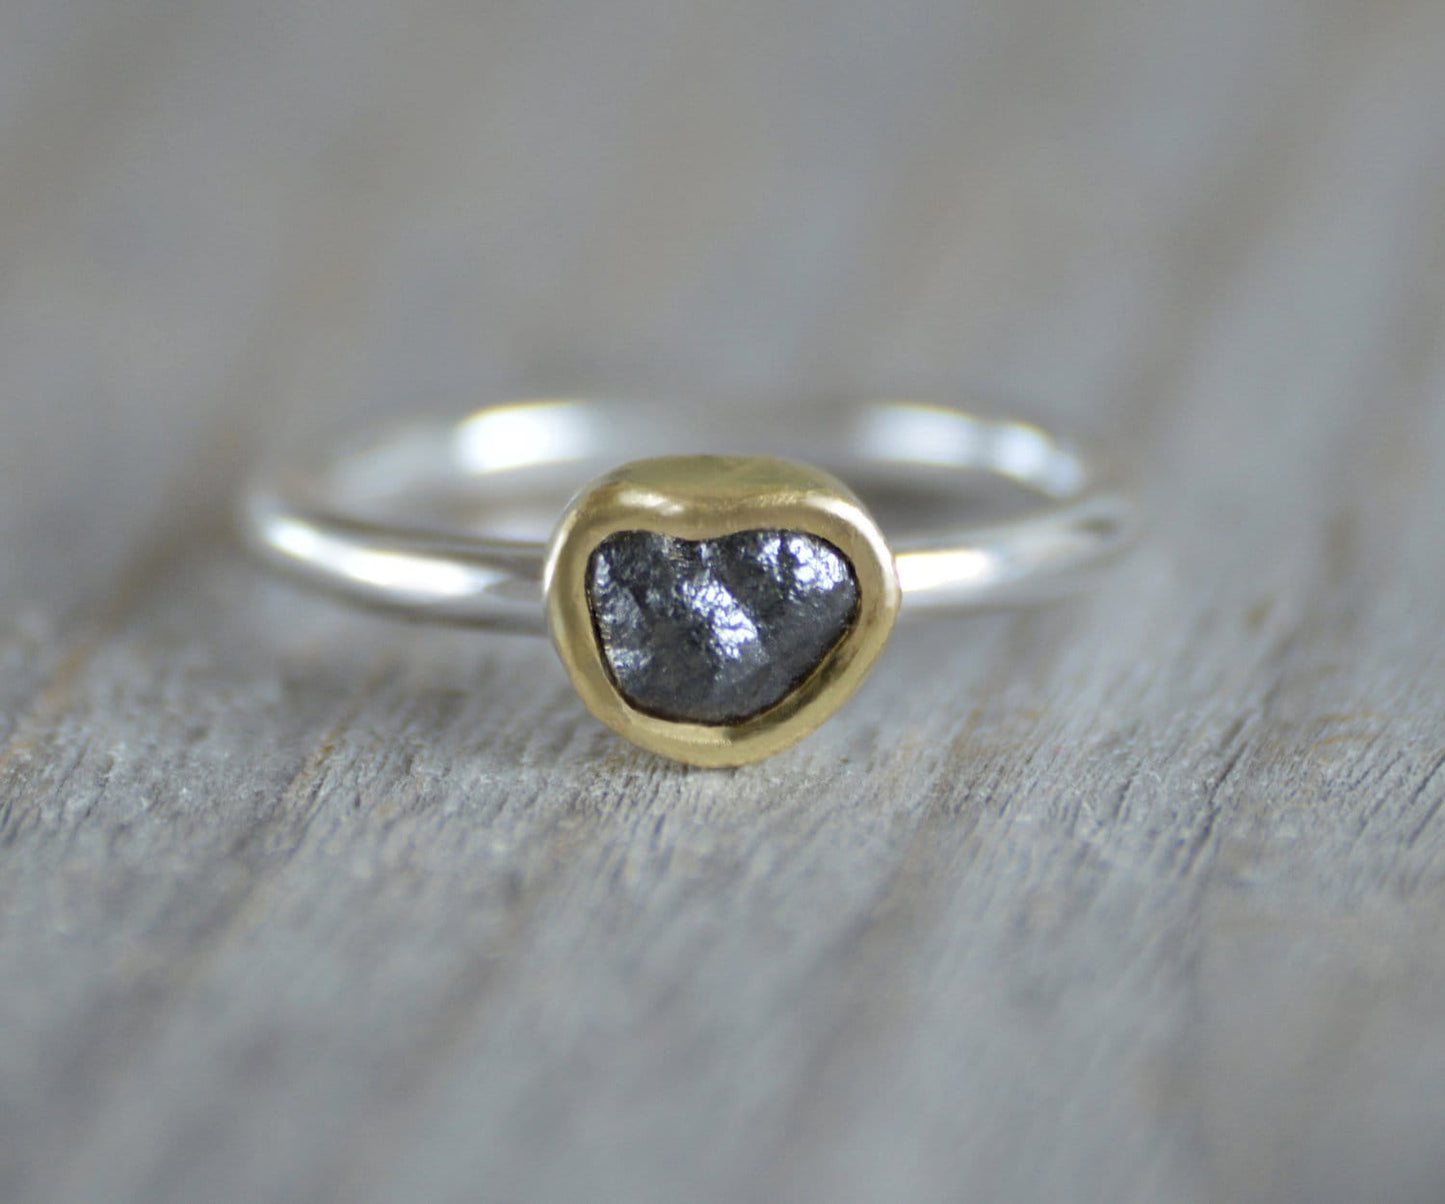 Black Diamond Engagement Ring in 18ct Yellow Gold and Sterling Silver, 2 Tone Diamond Ring